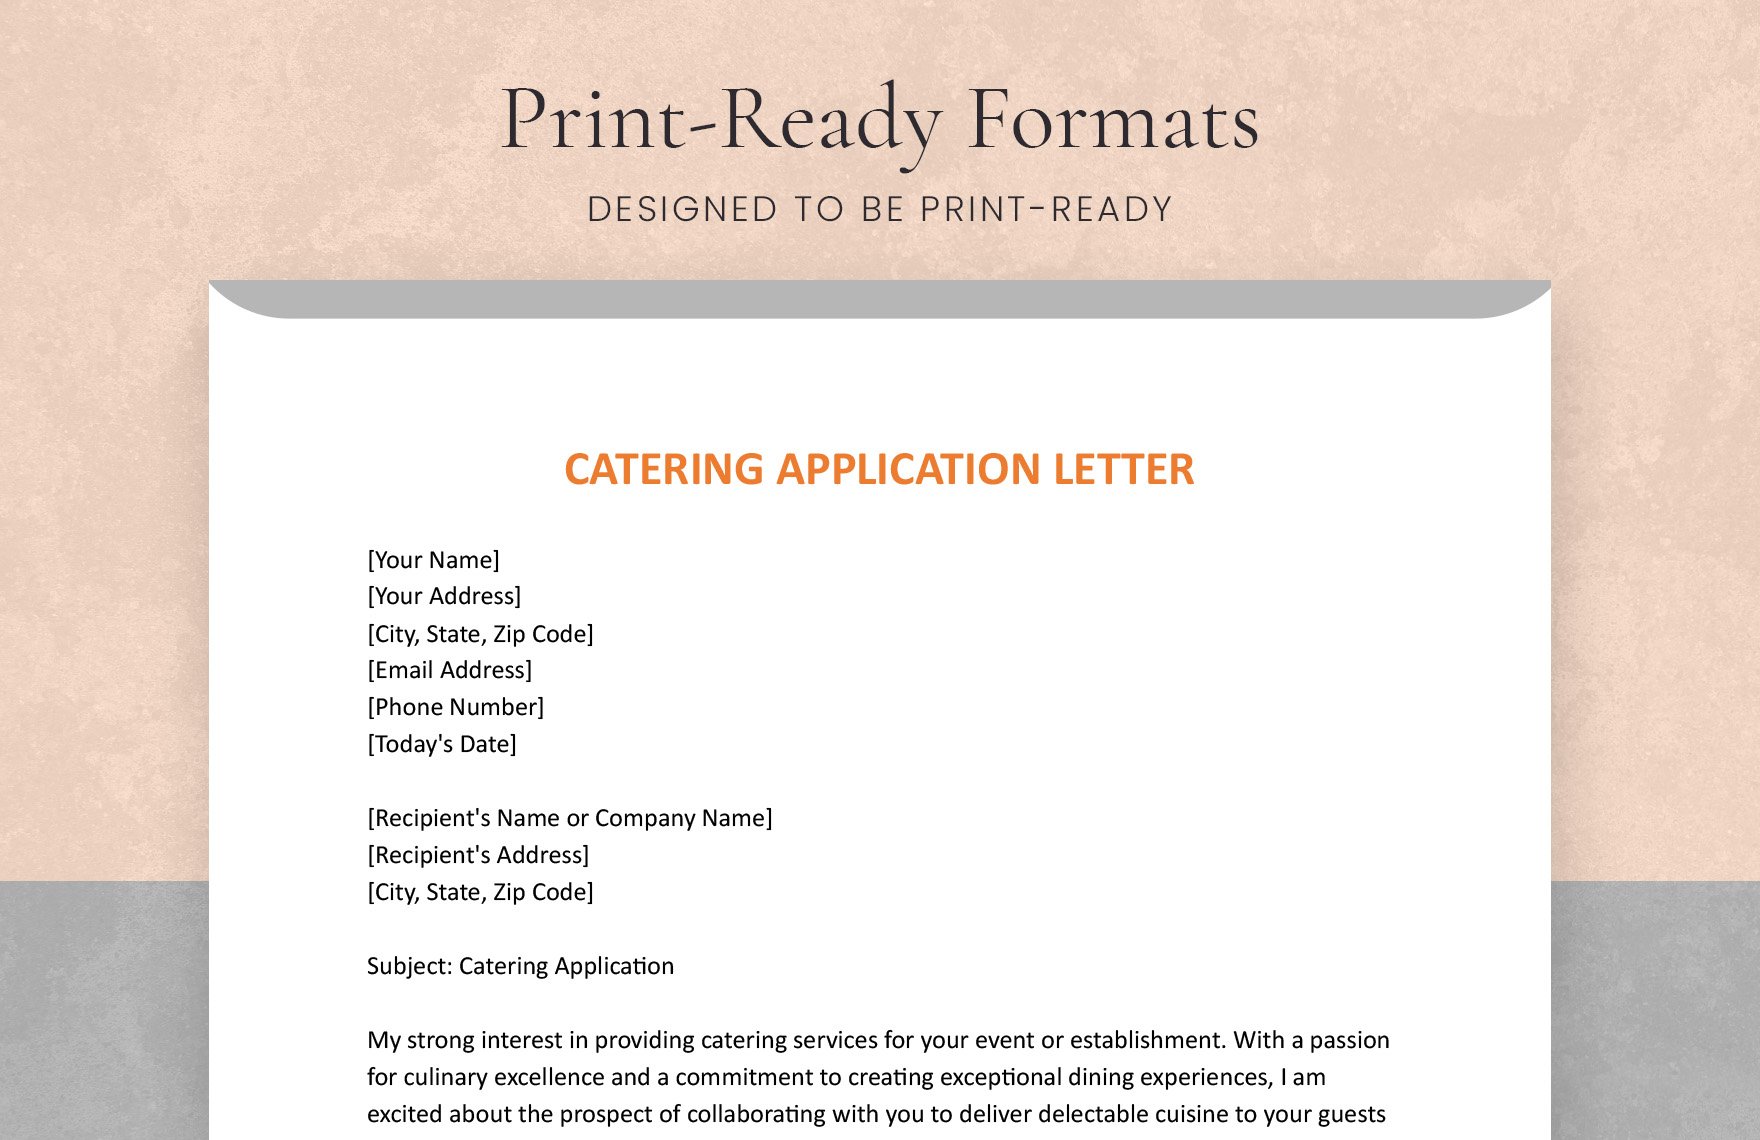 Catering Application Letter